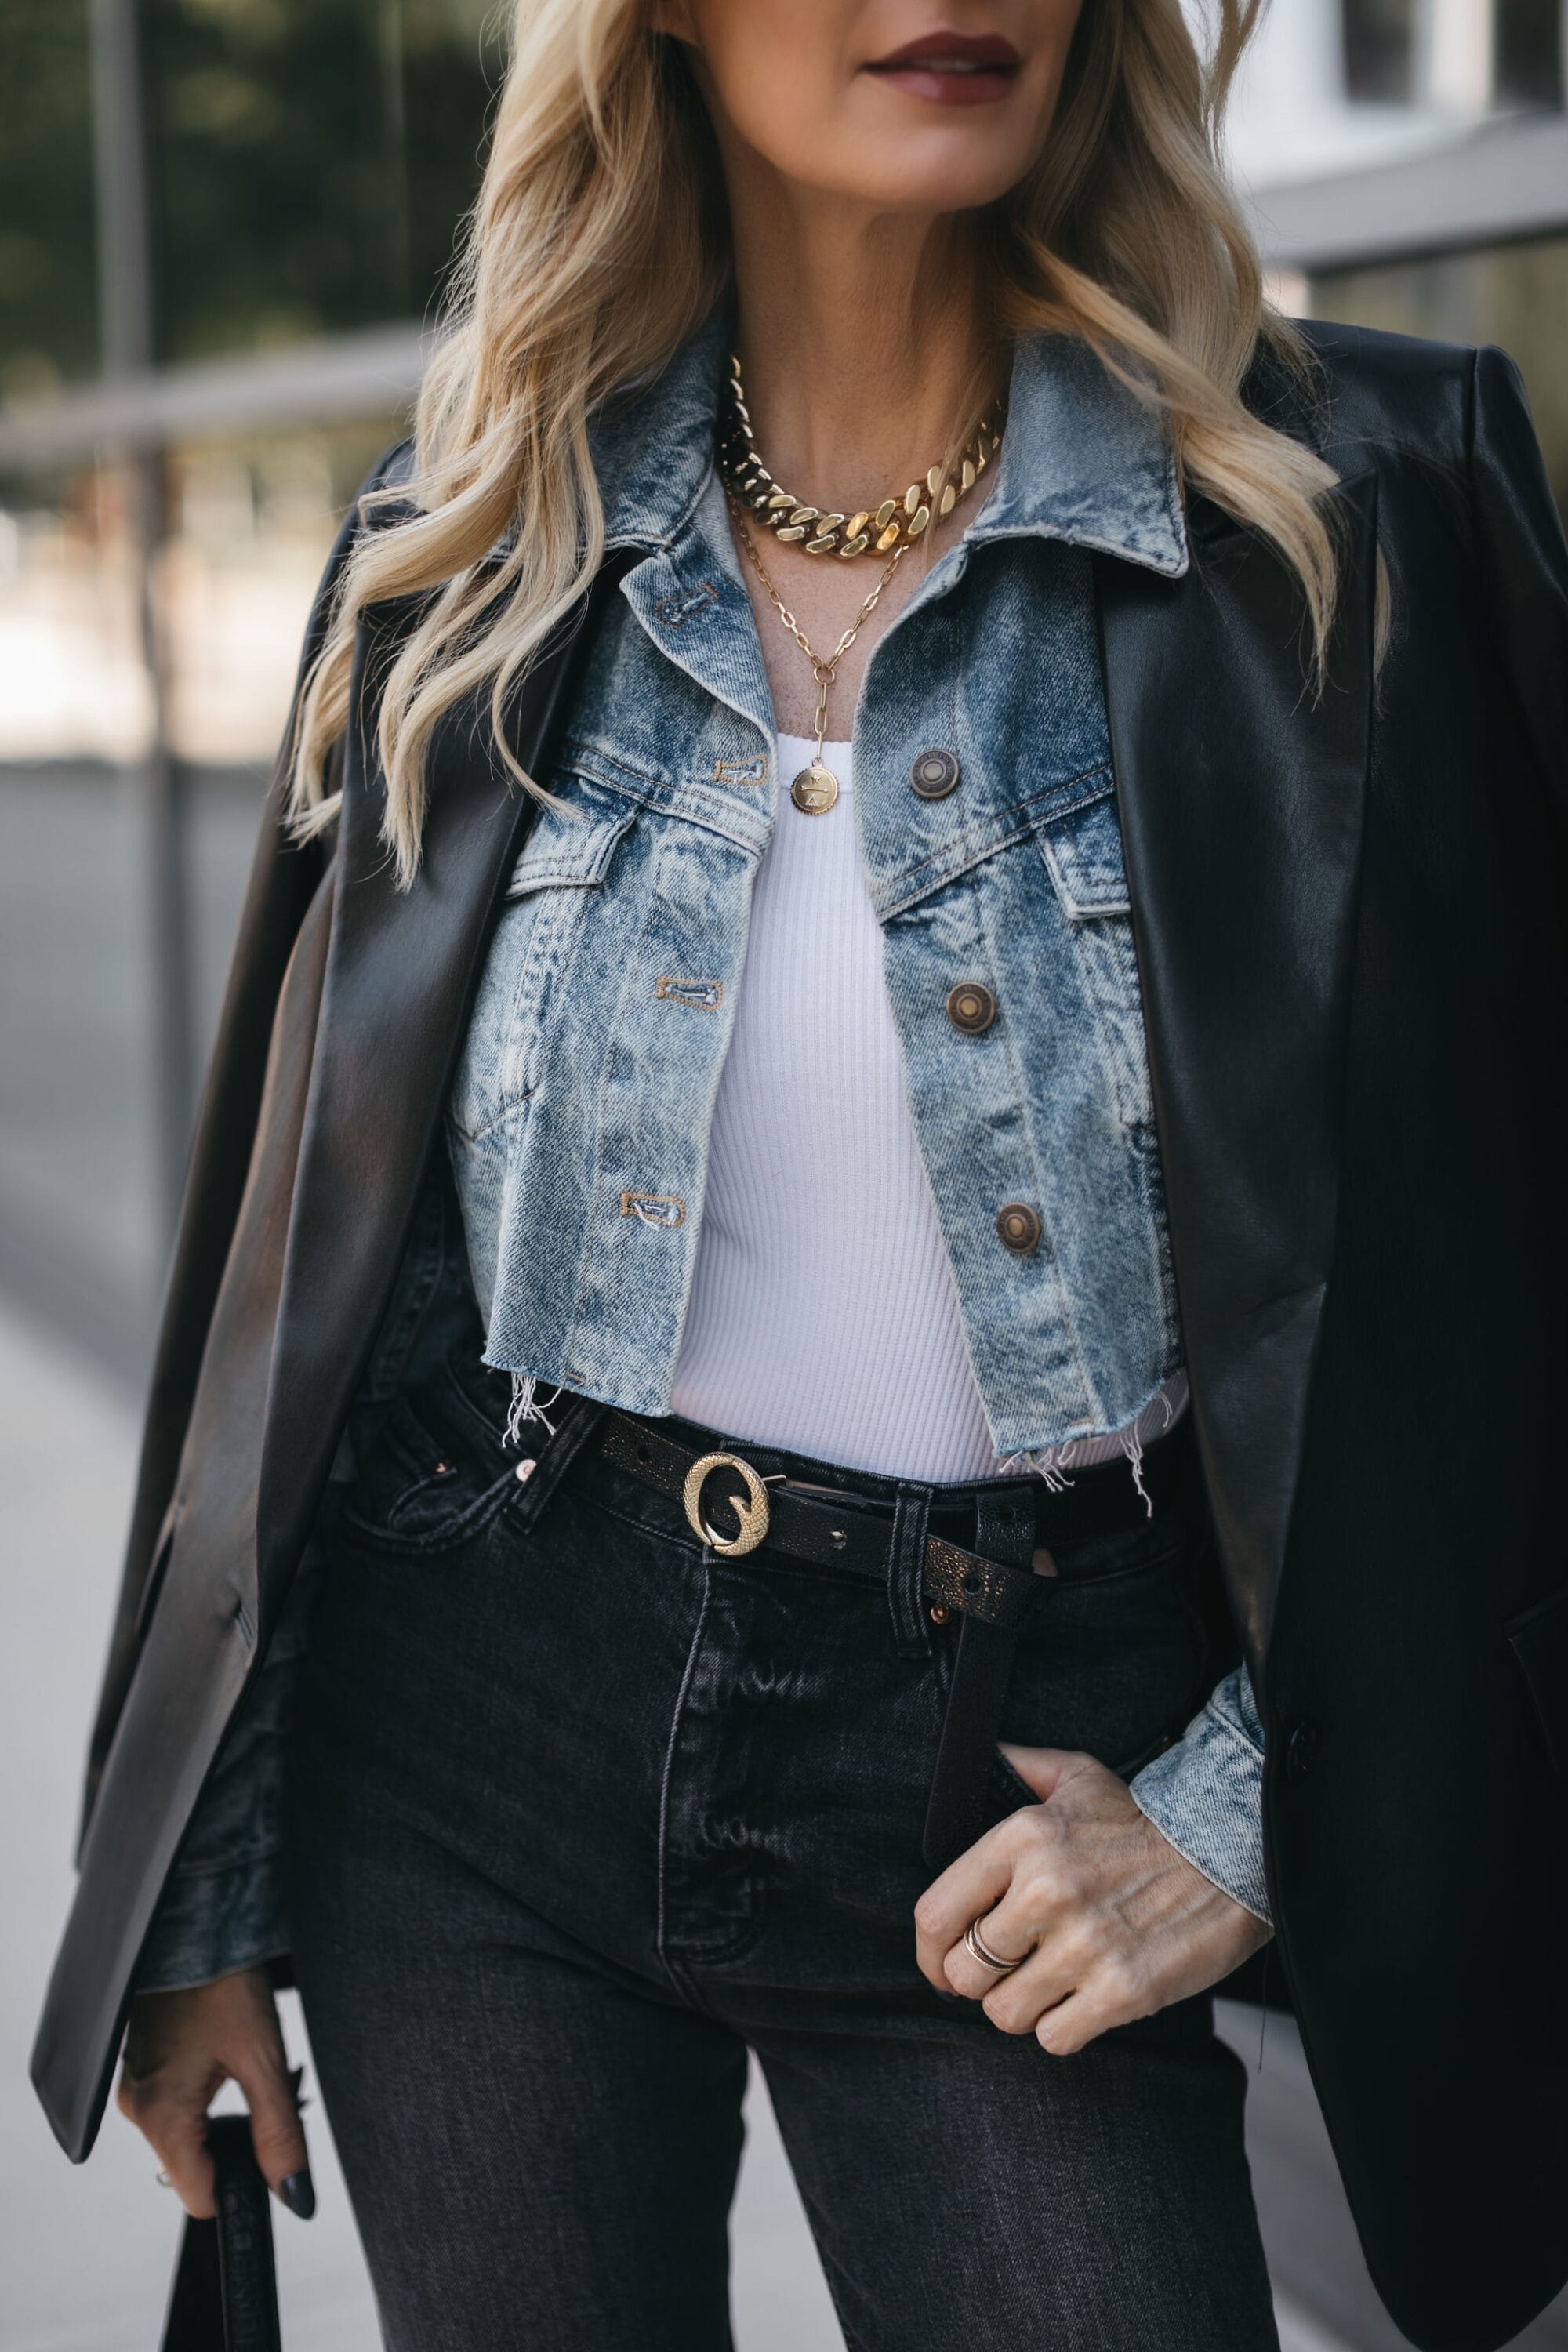 Dallas fashion blogger over 40 wearing clinch belt as accessory with layers.